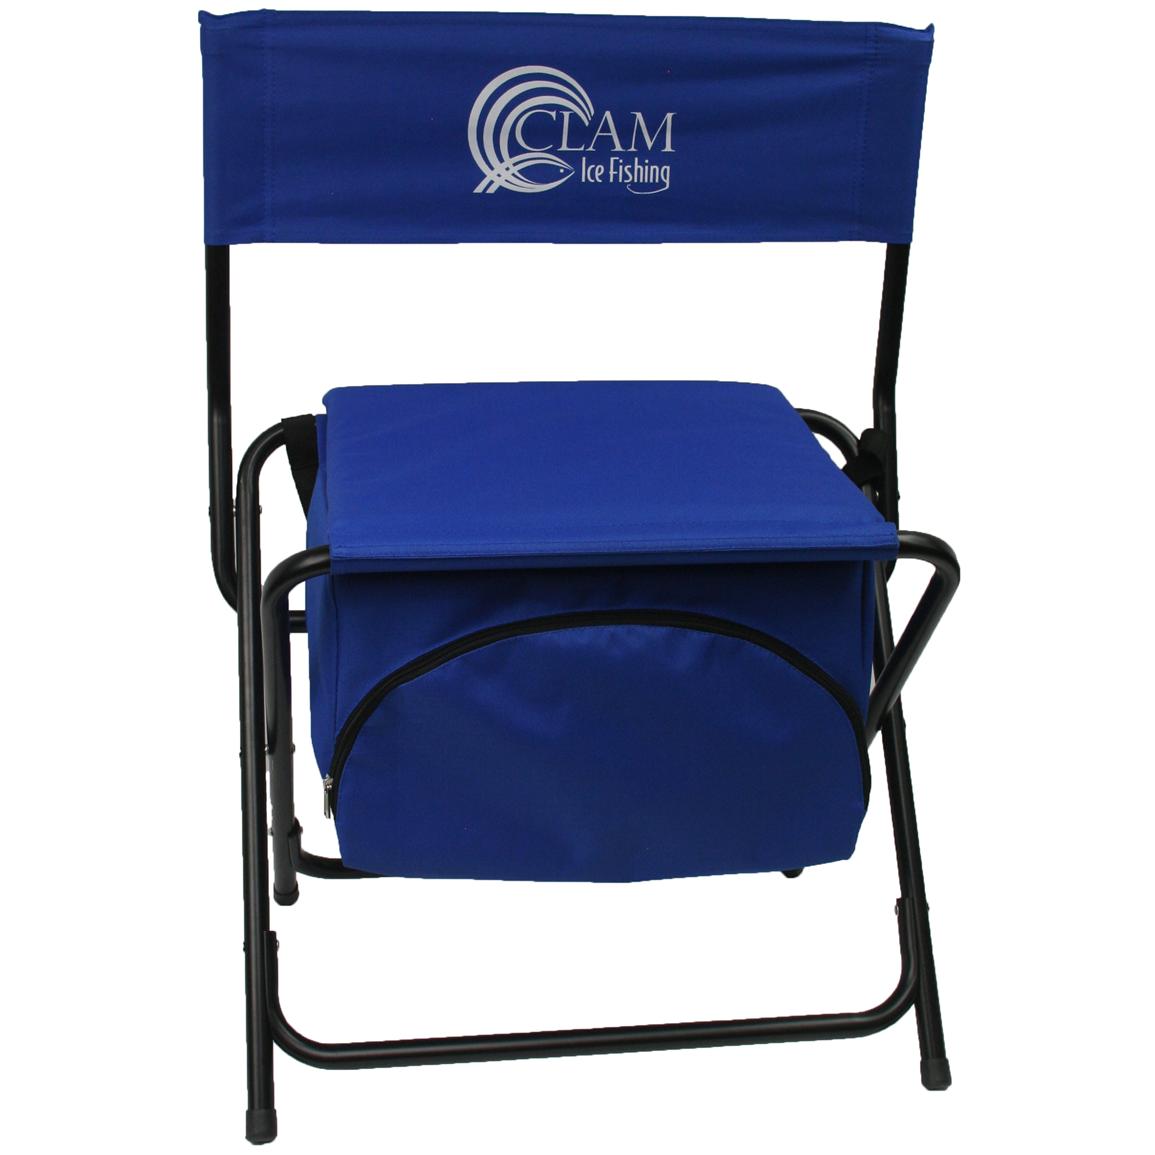 Clam™ Folding Cooler Chair - 194697, Ice Fishing ...